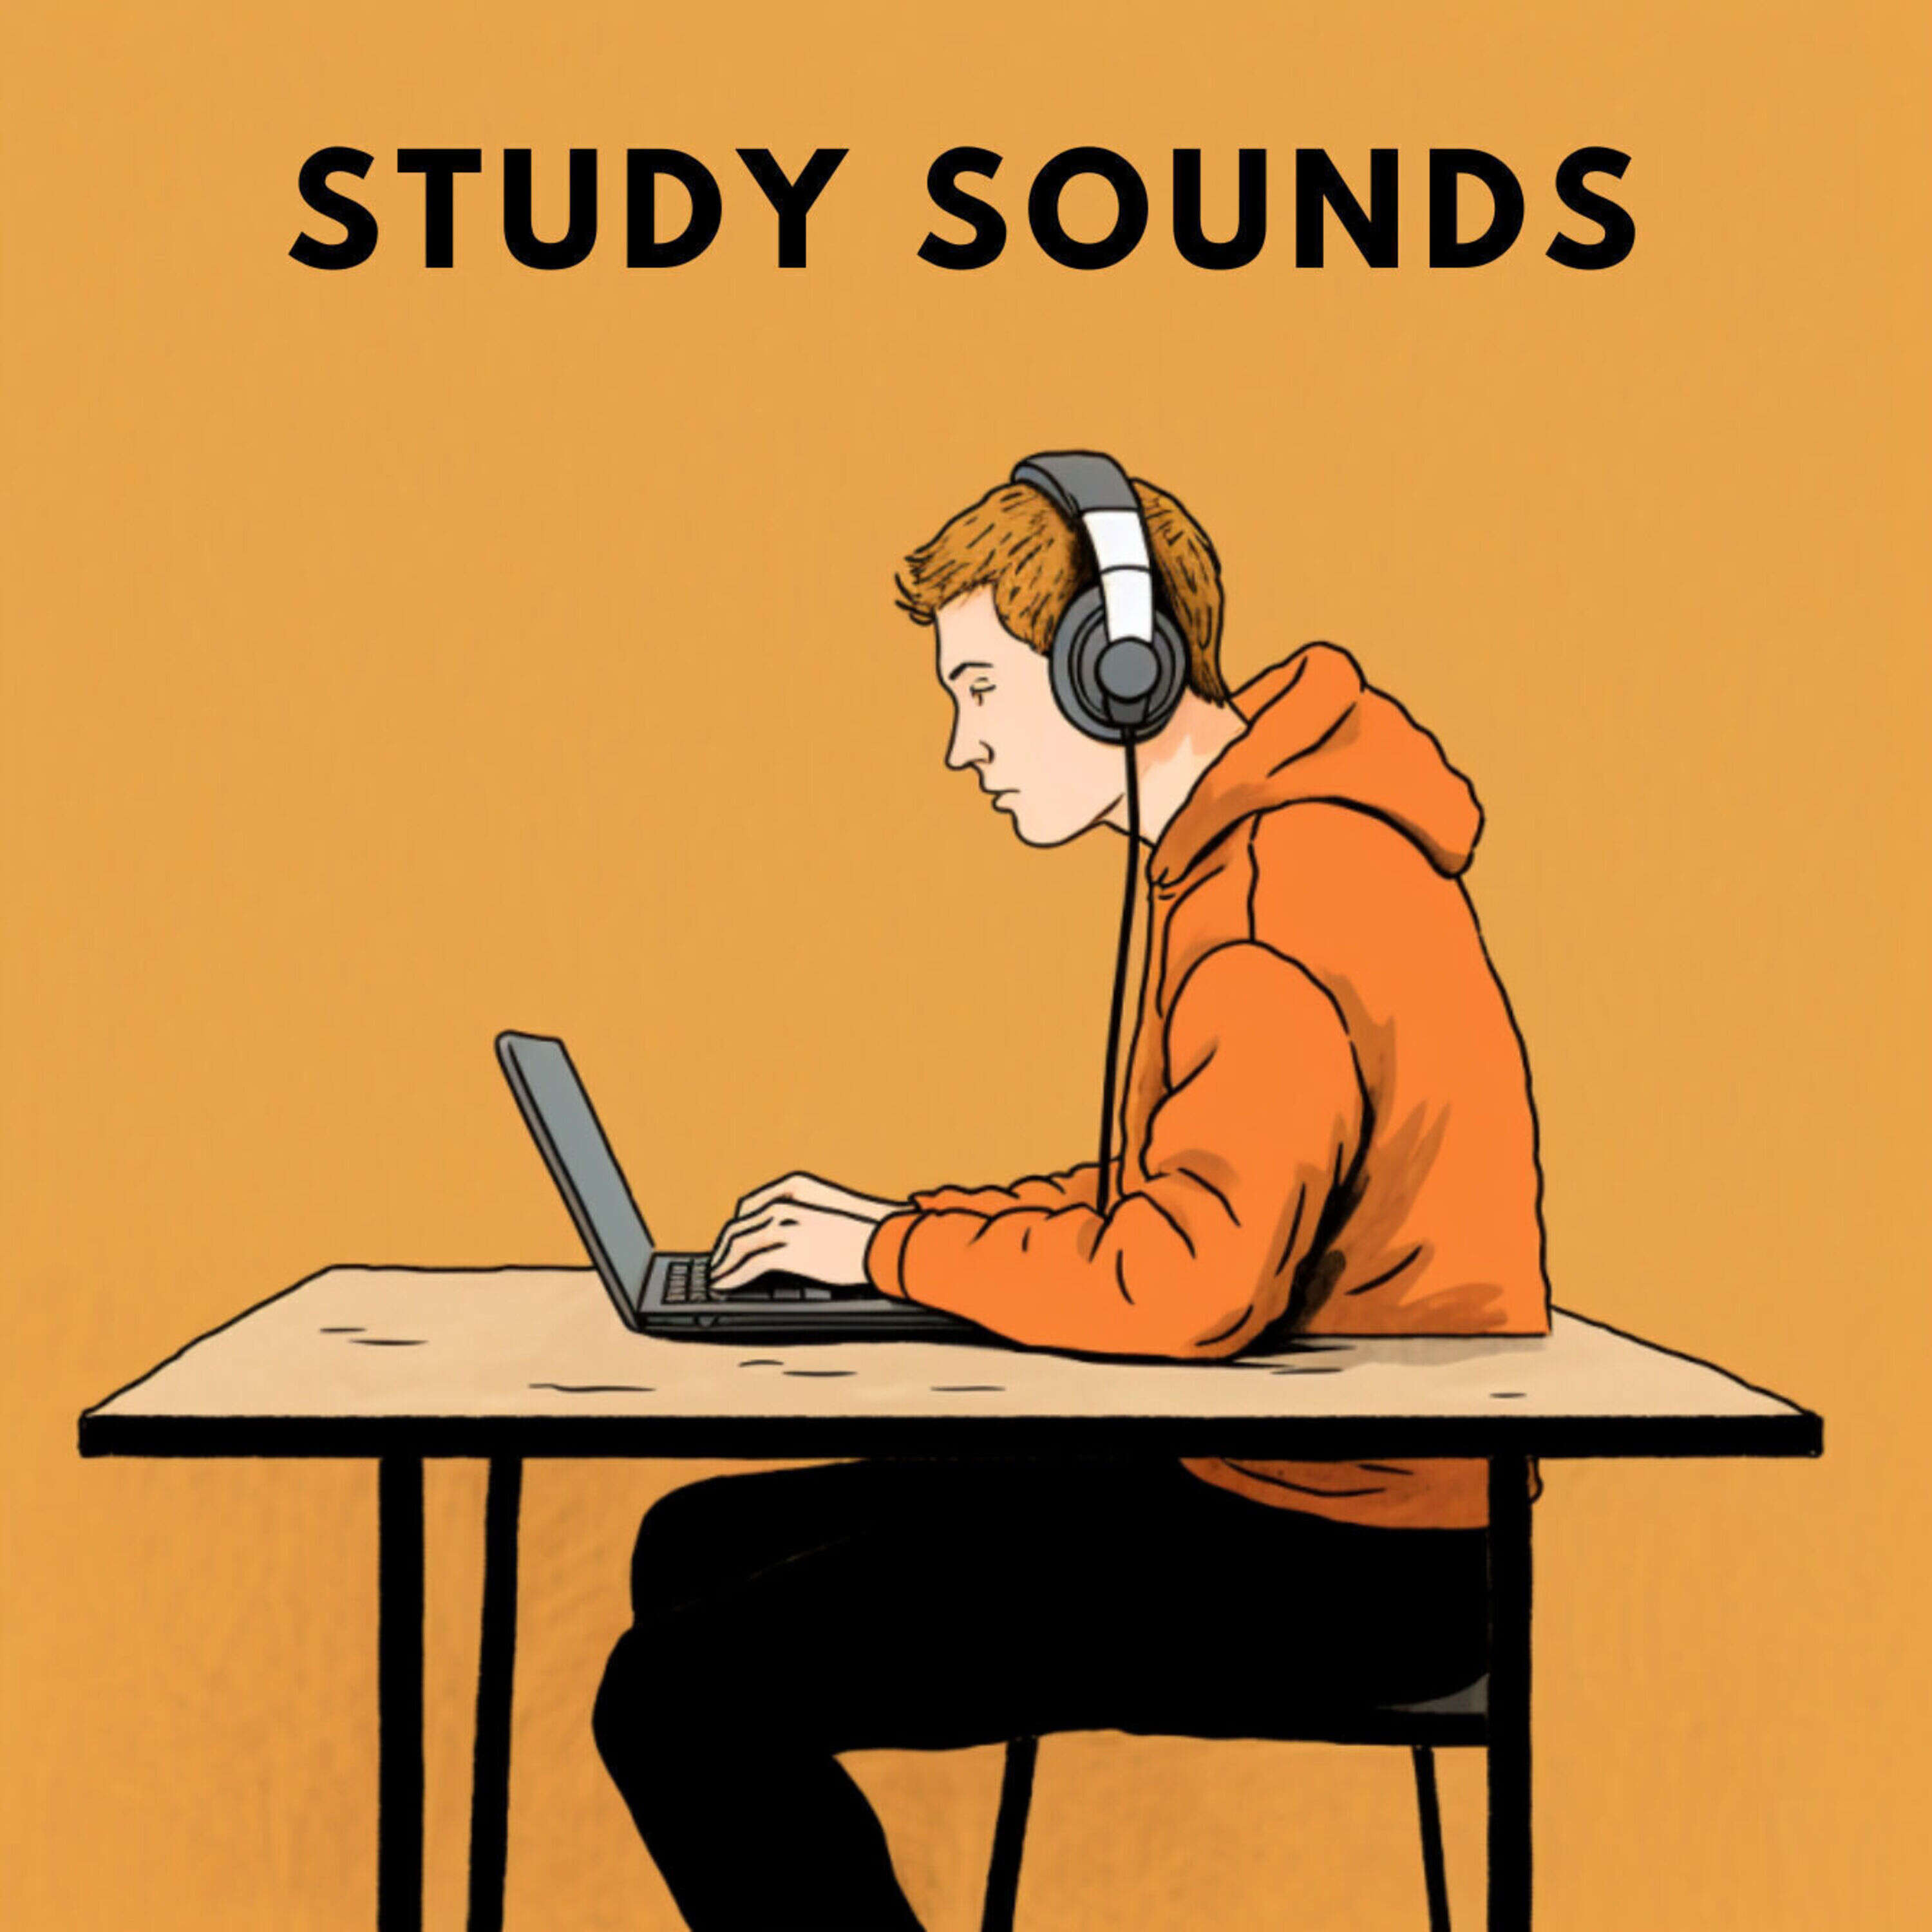 Beautiful Piano Sounds 24/7 - Study Sounds To Concentrate